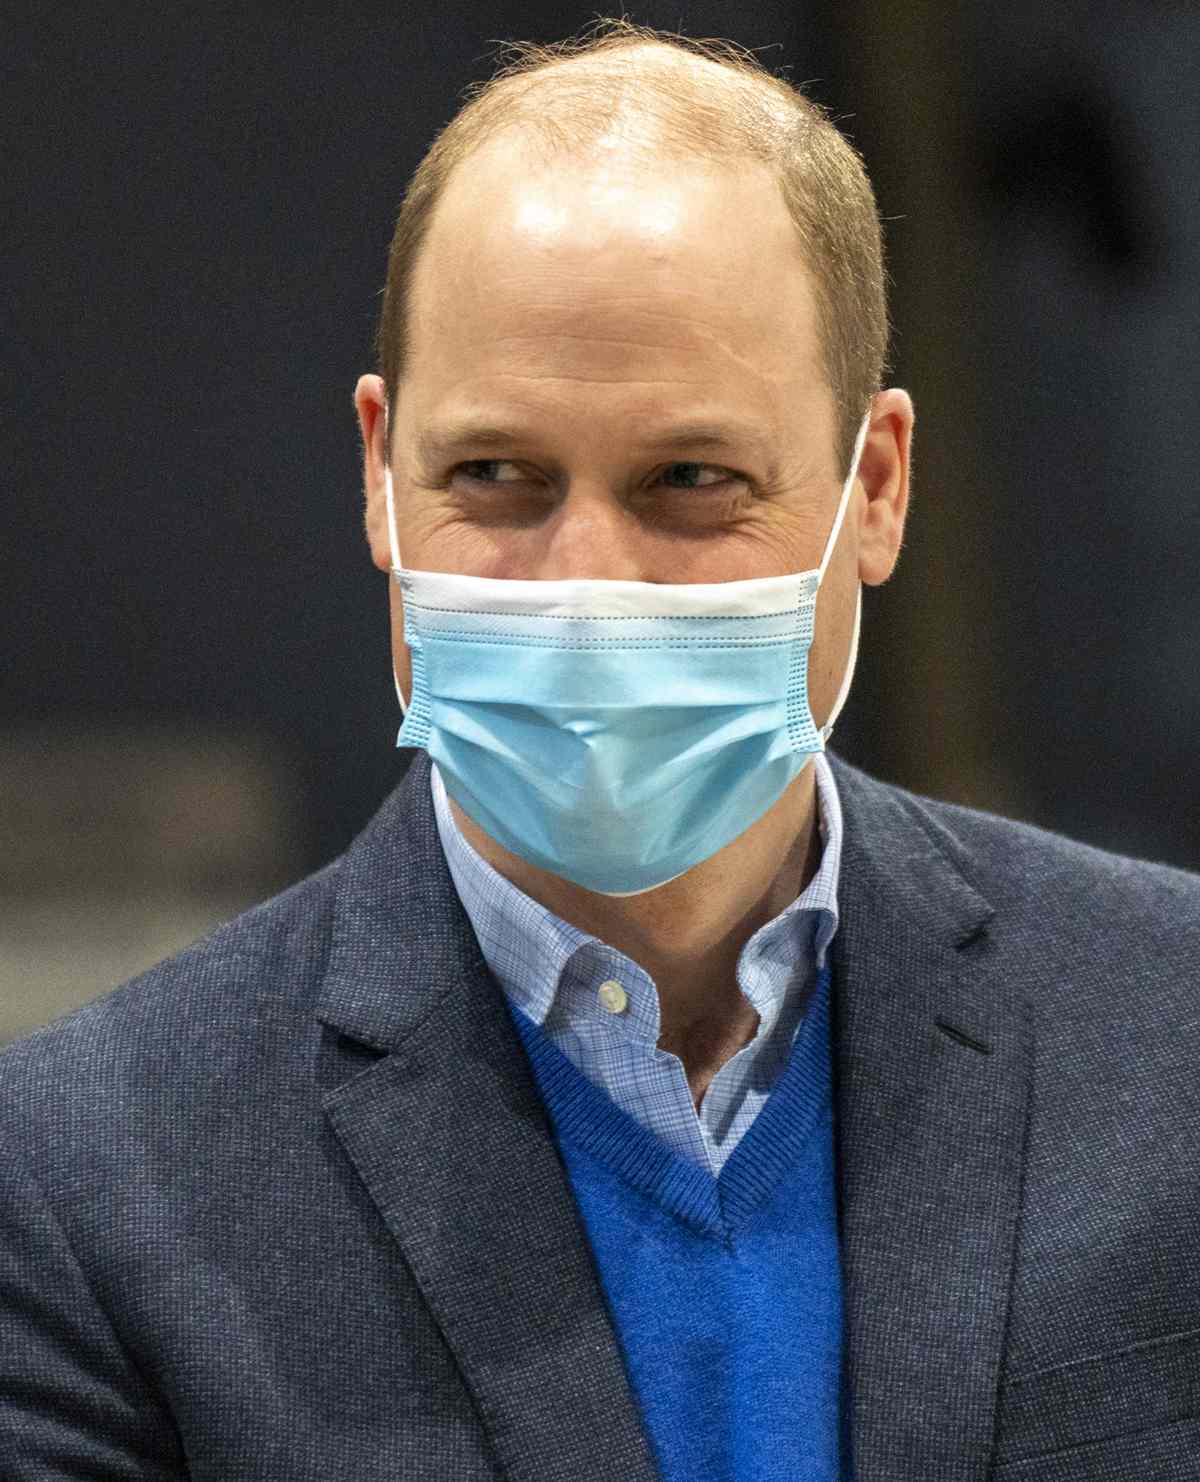 Prince William at the vaccinations center on Monday